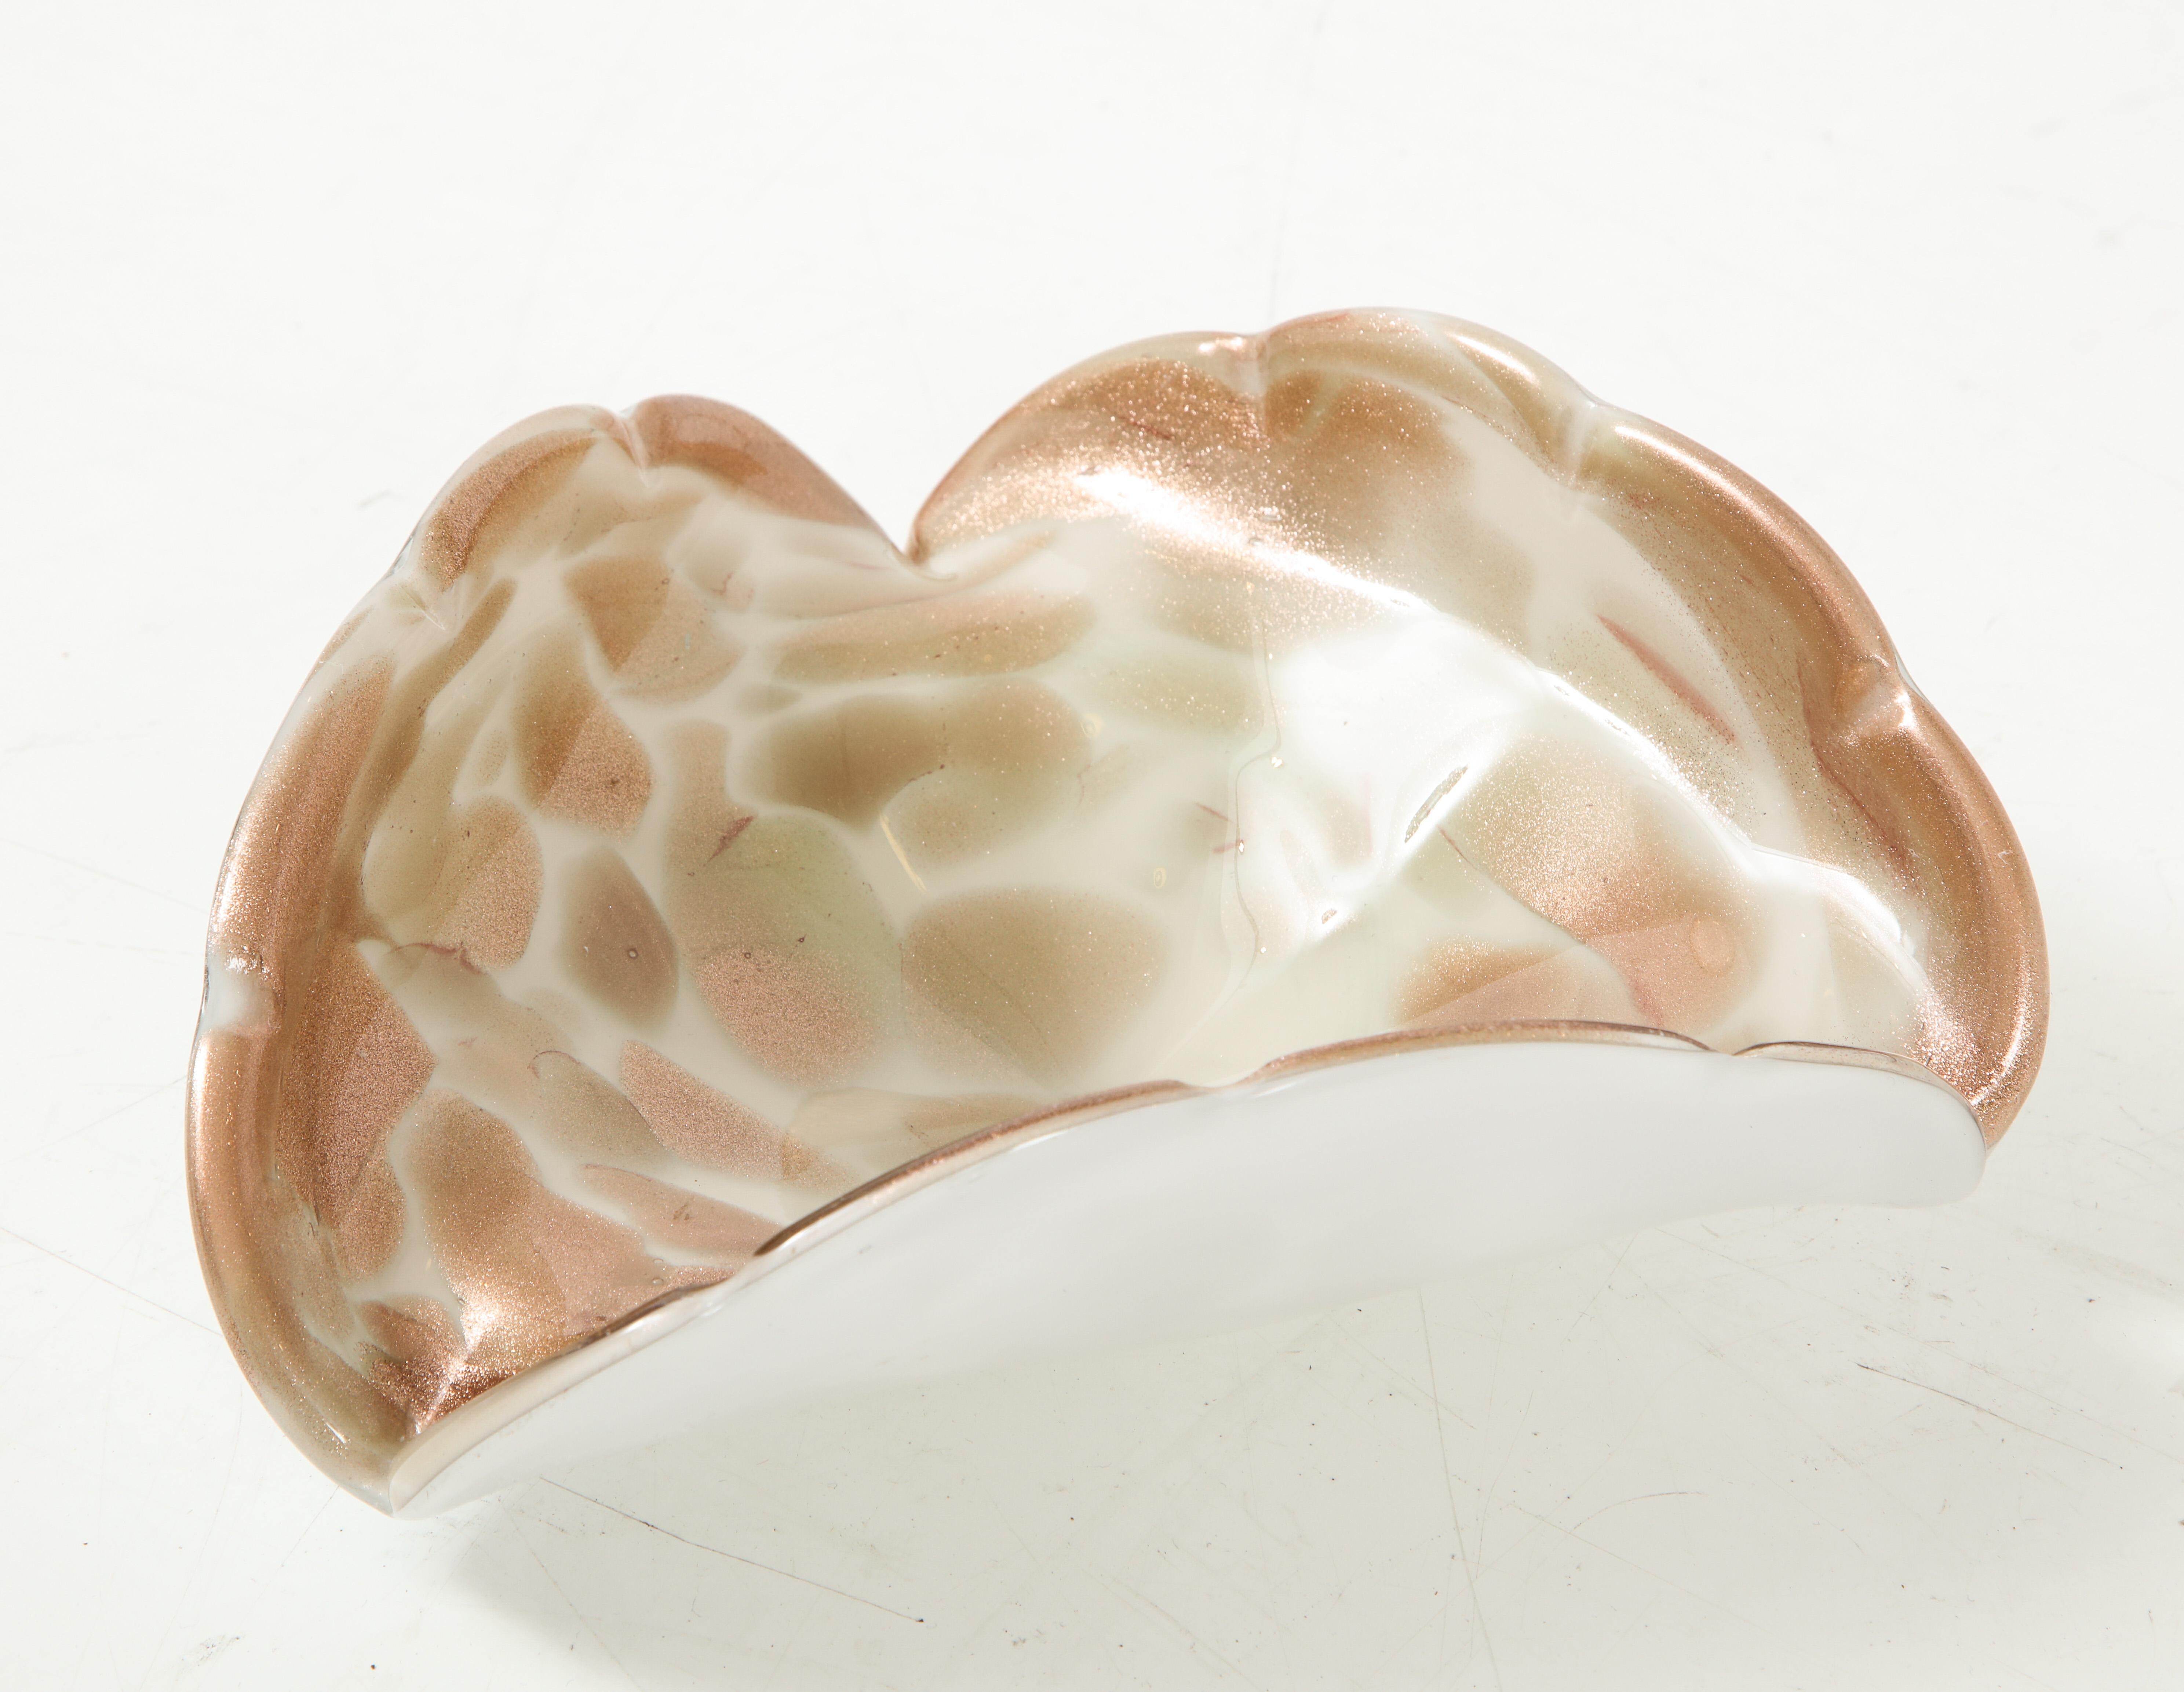 Wave form Murano glass vide pooch vessel in white glass with copper/gold inclusion throughout in the interior.